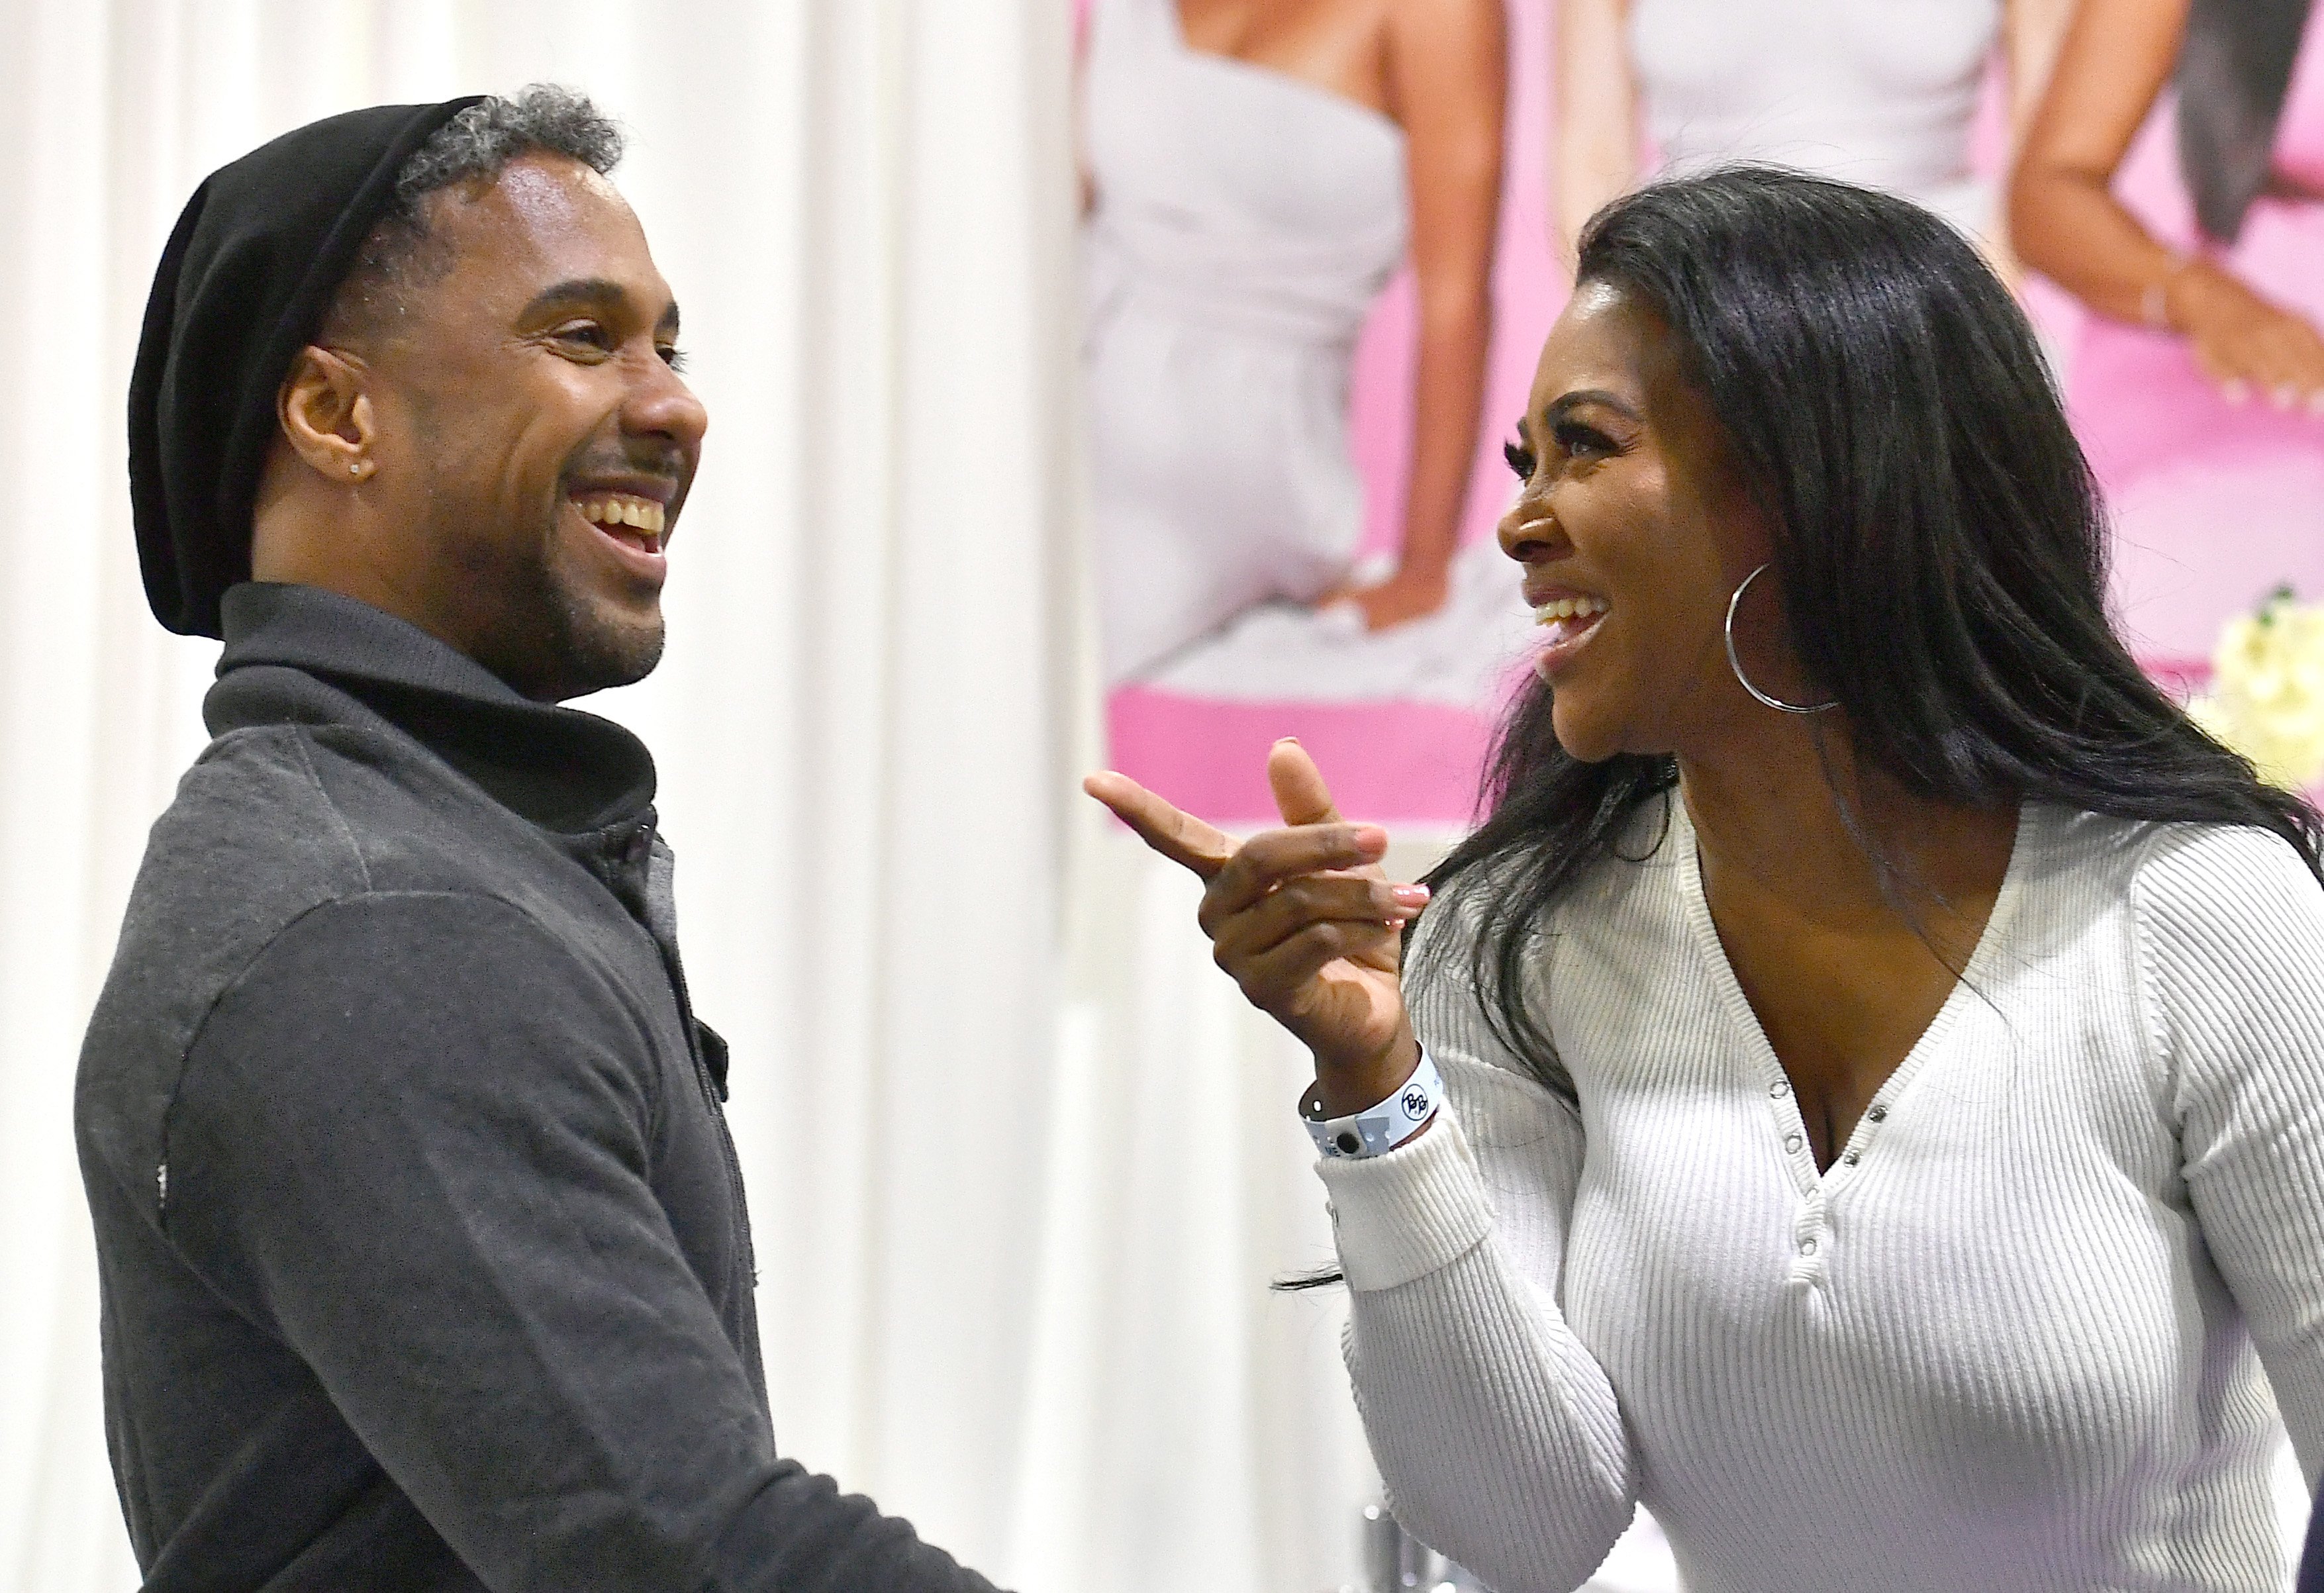 Marc Daly and Kenya Moore attend the 2020 Bronner Brothers International Beauty Show at Georgia World Congress Center in Atlanta, Georgia on February 08, 2020 | Photo: Getty Images